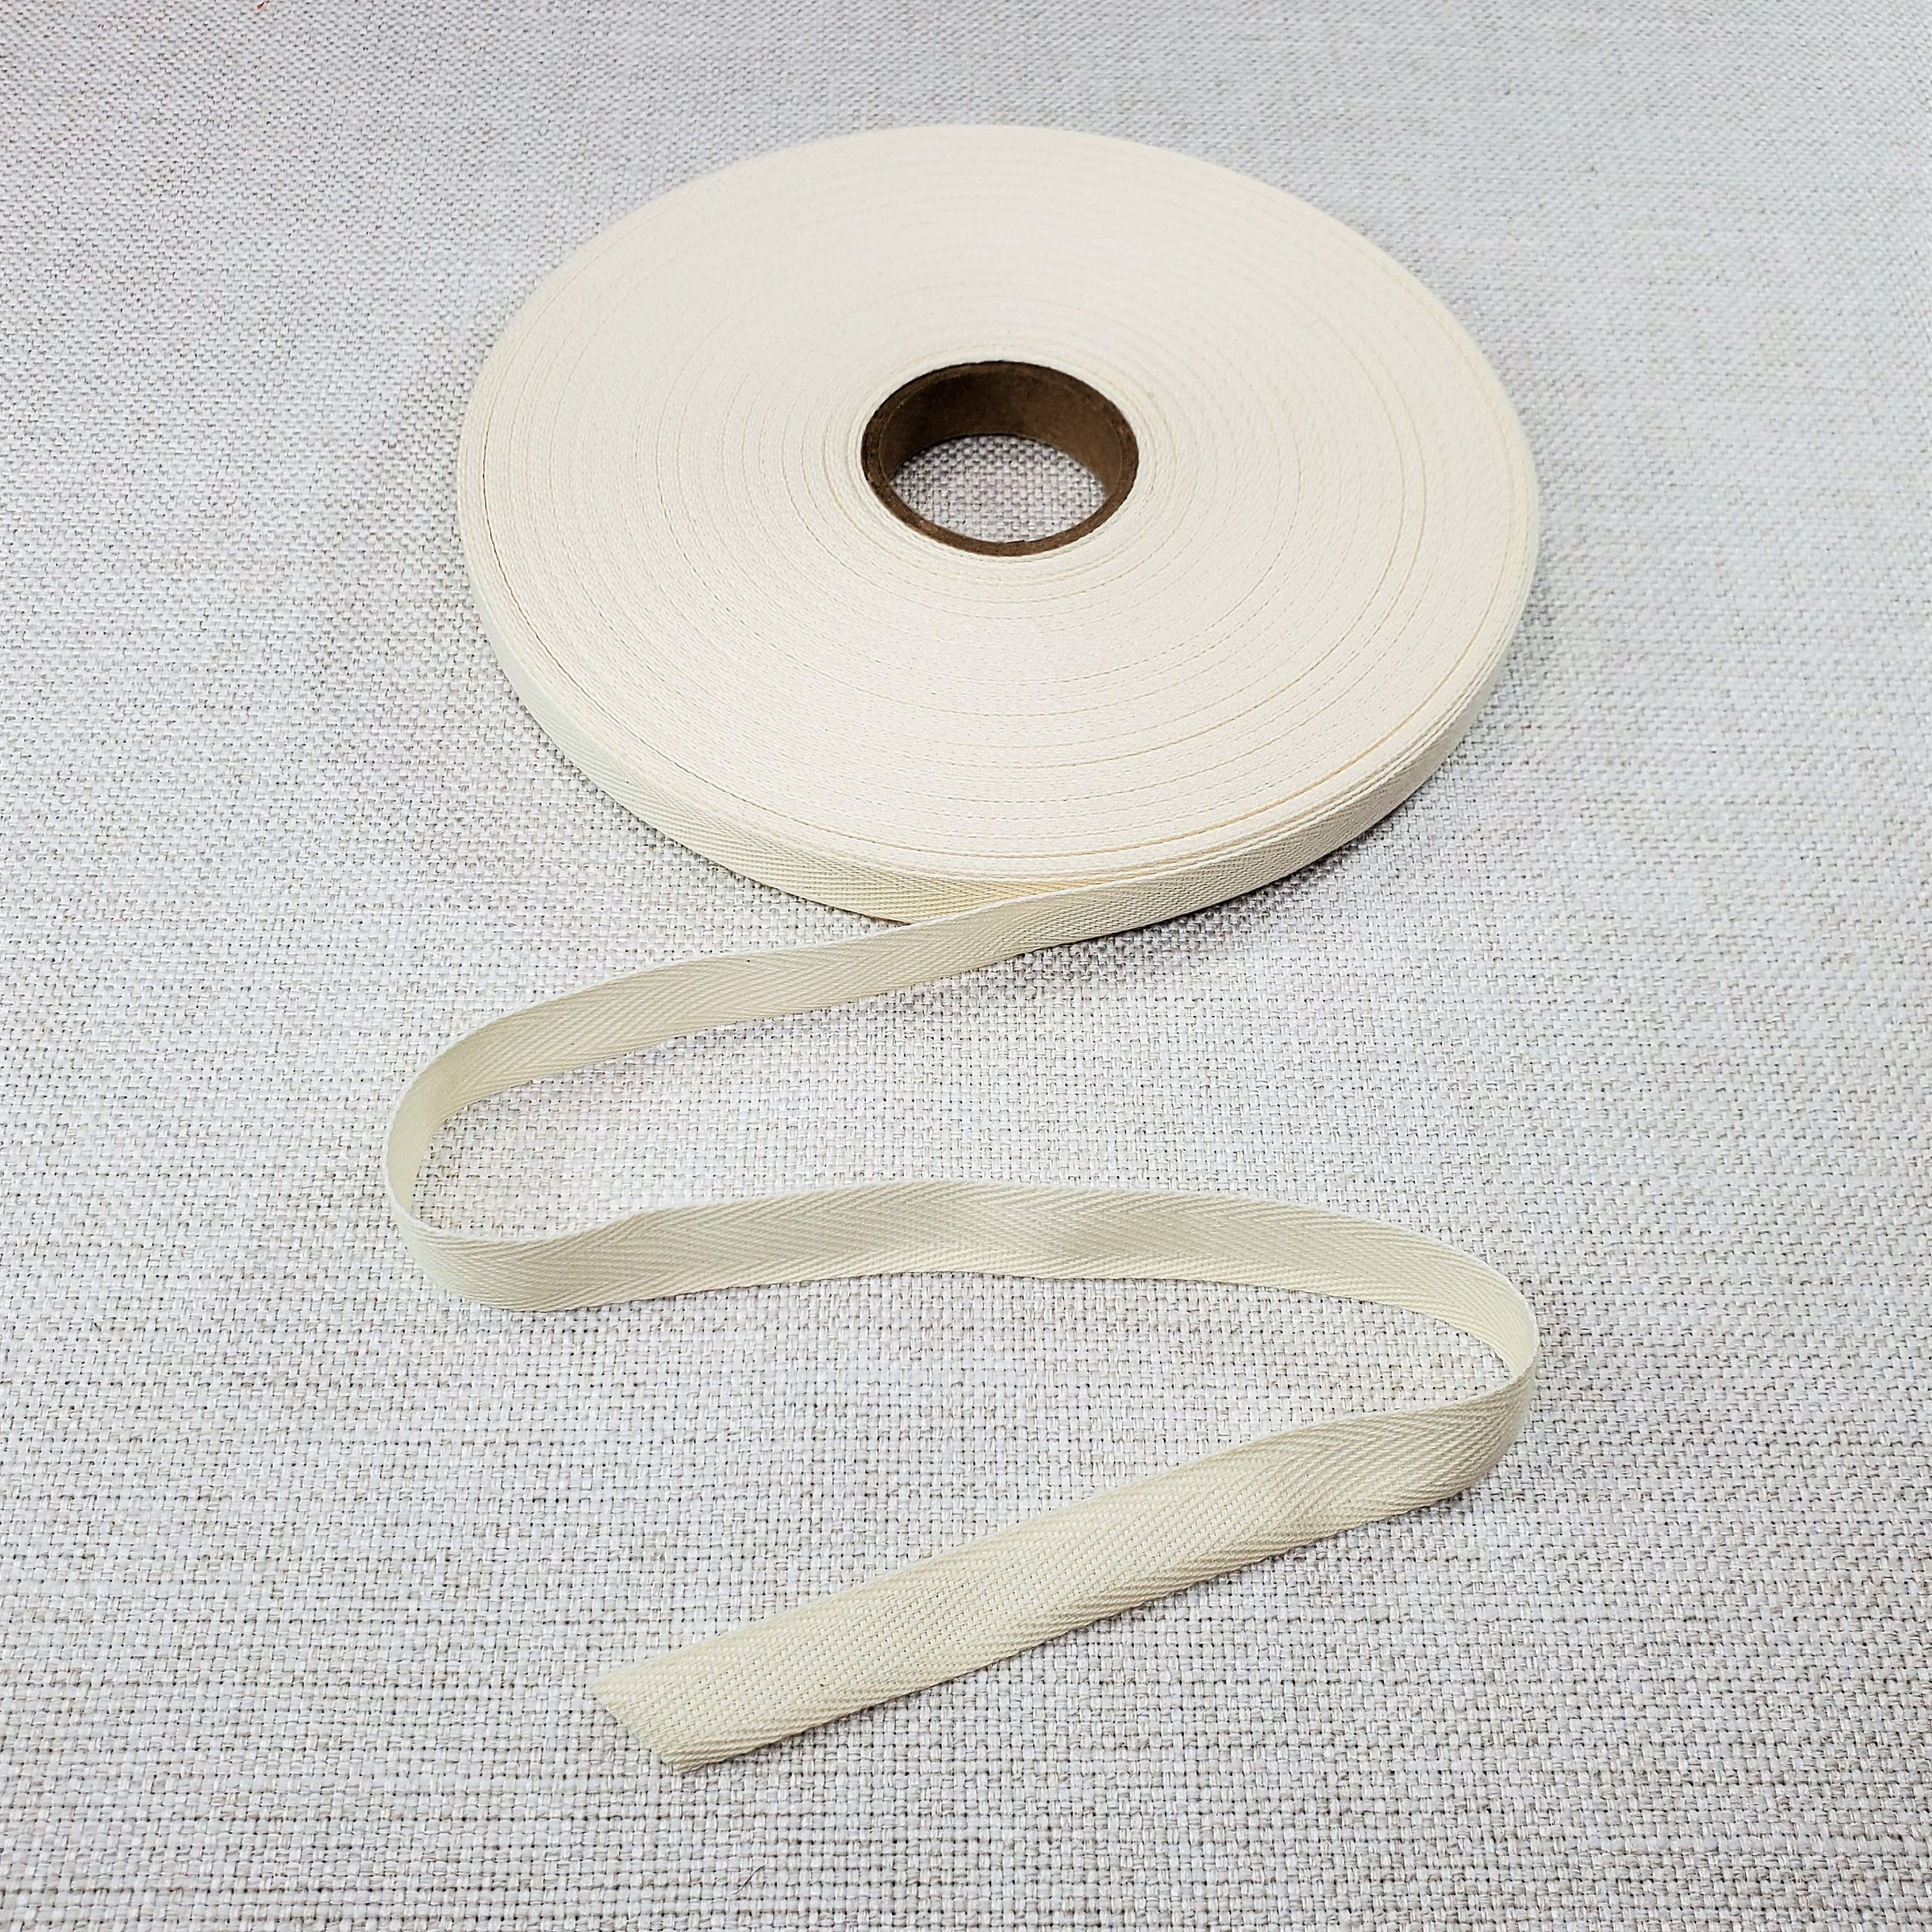 Cotton Twill Tape 3/8, 5/8, 7/8 and 1.5 